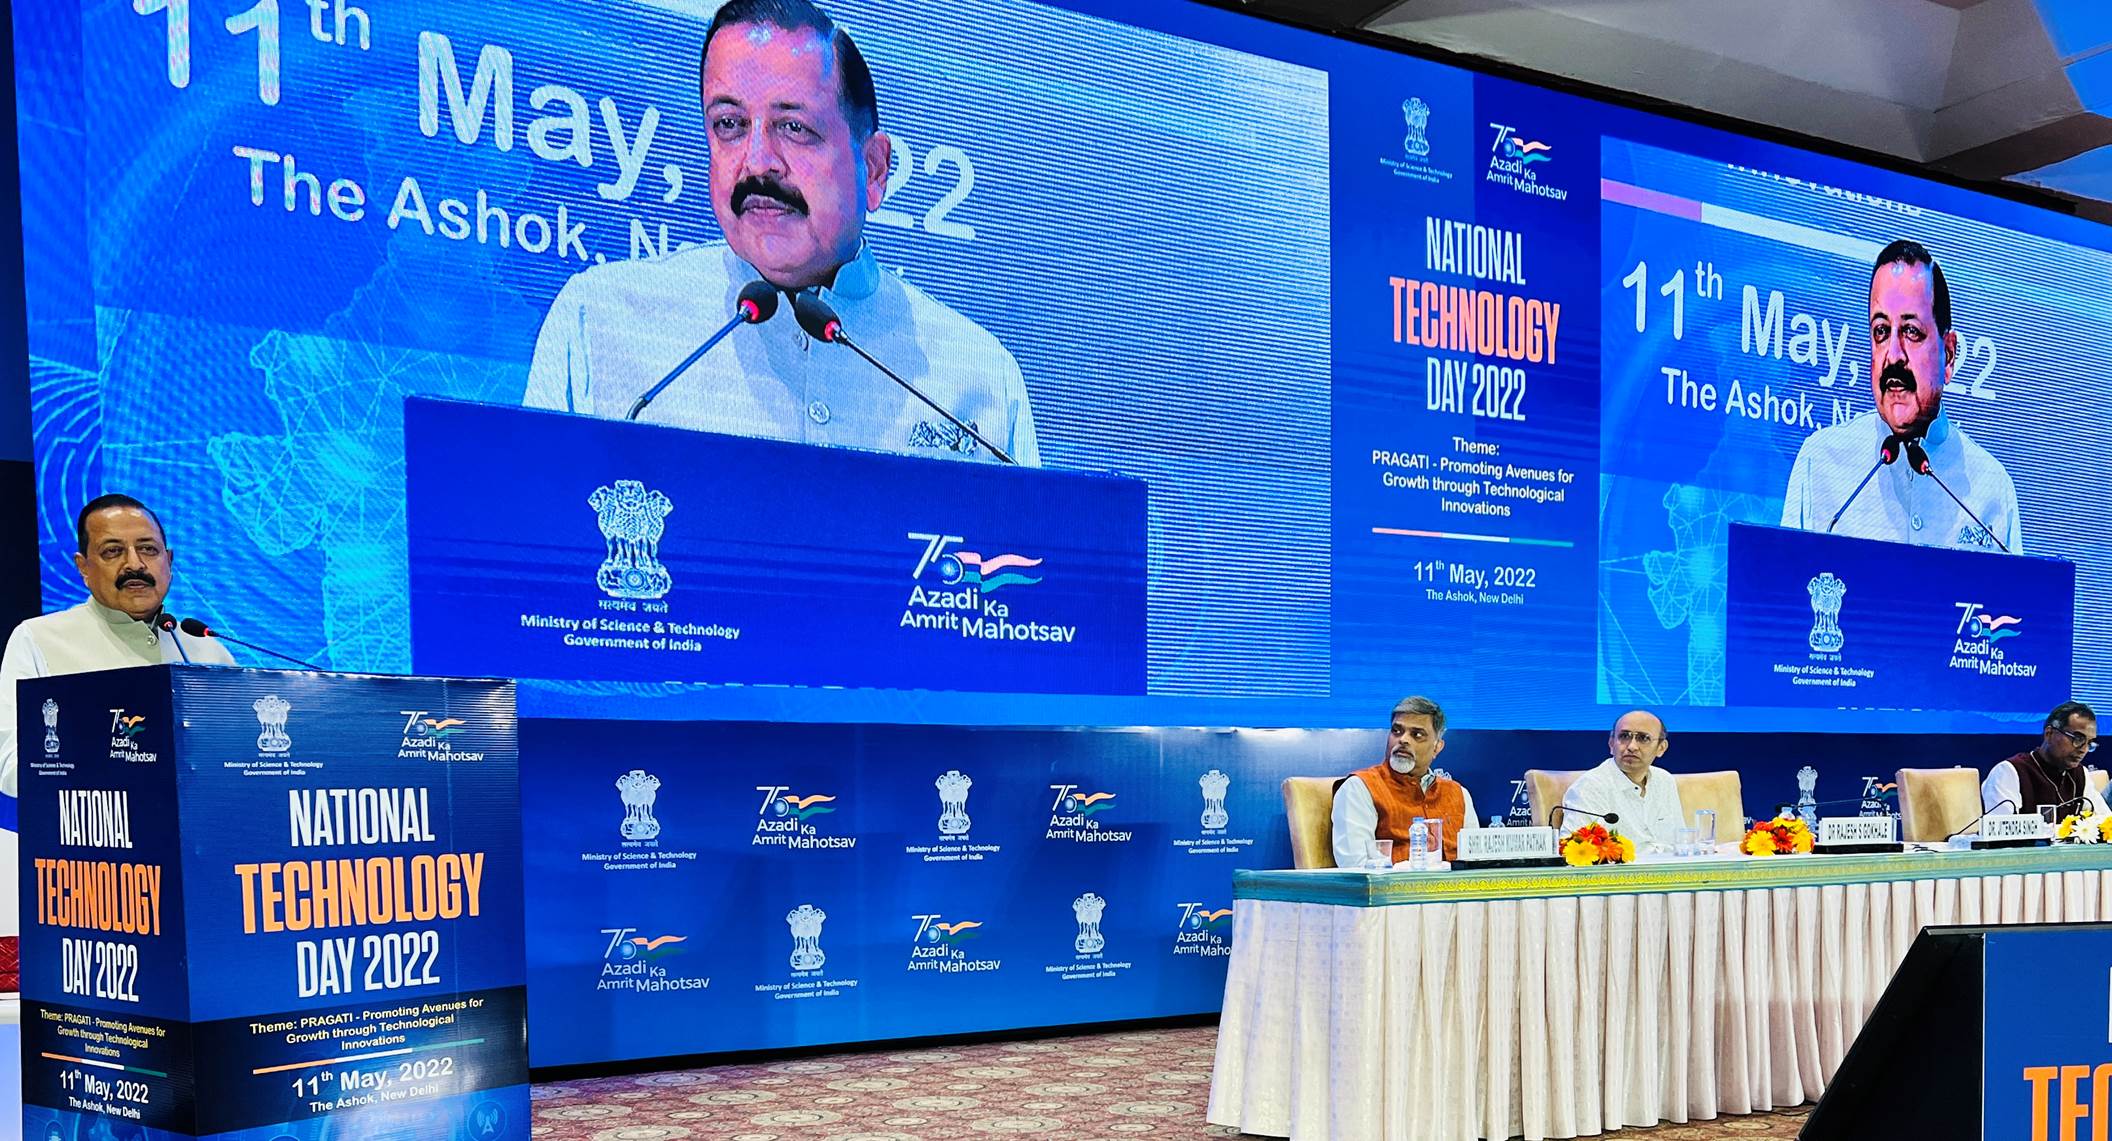 Union Minister Dr Jitendra Singh says, future belongs to technology-driven economy and calls for building Innovation Ecosystem in the country